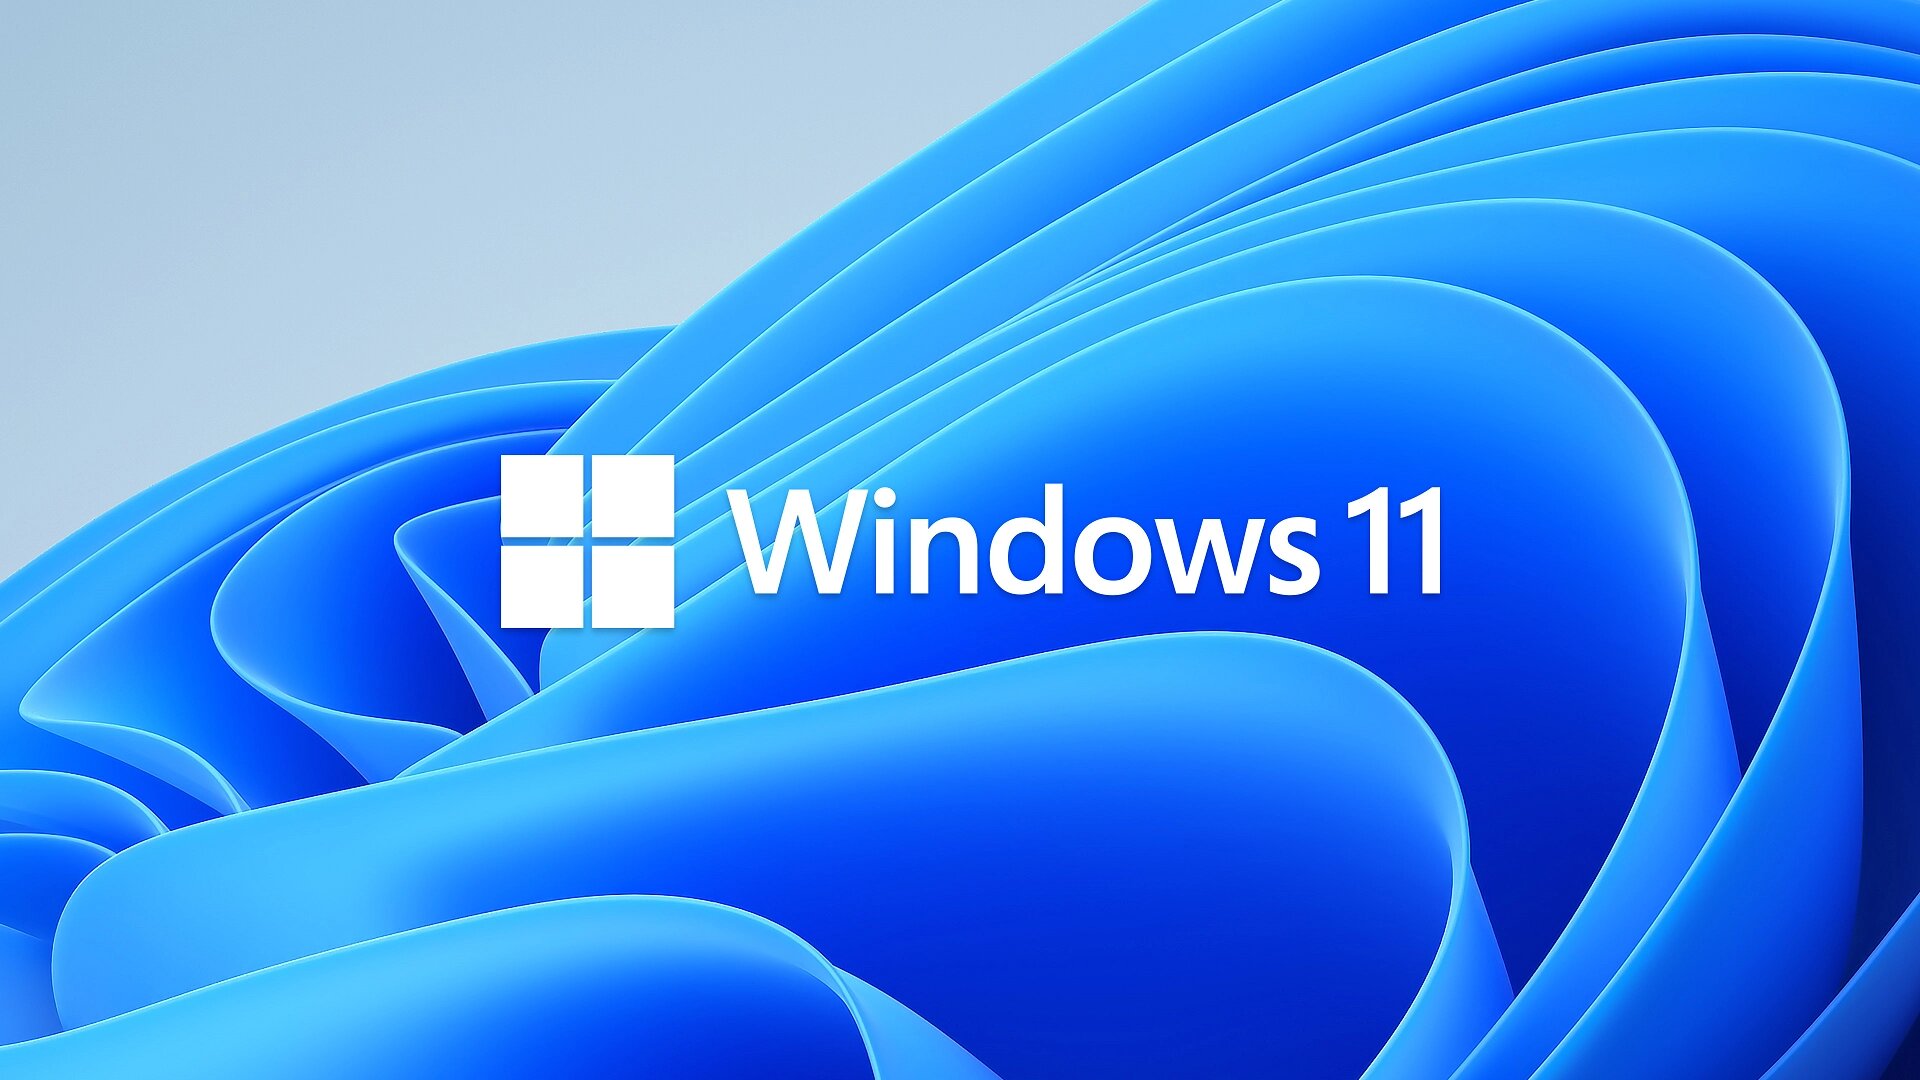 Windows 11 System Requirements and Supported Surface PCs